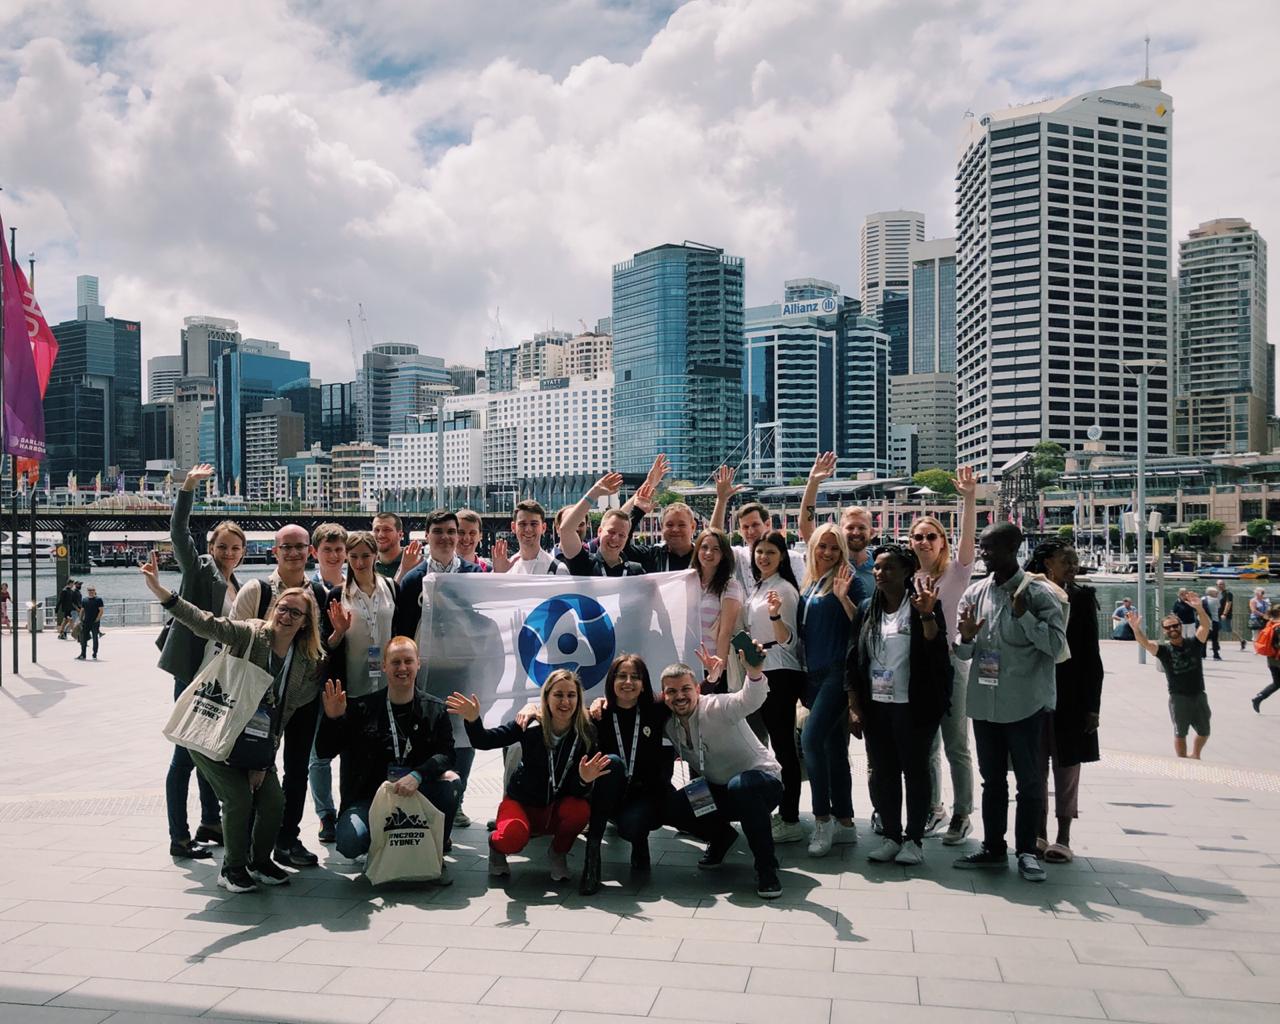 ROSATOM participates in the International Youth Nuclear Congress in Sydney